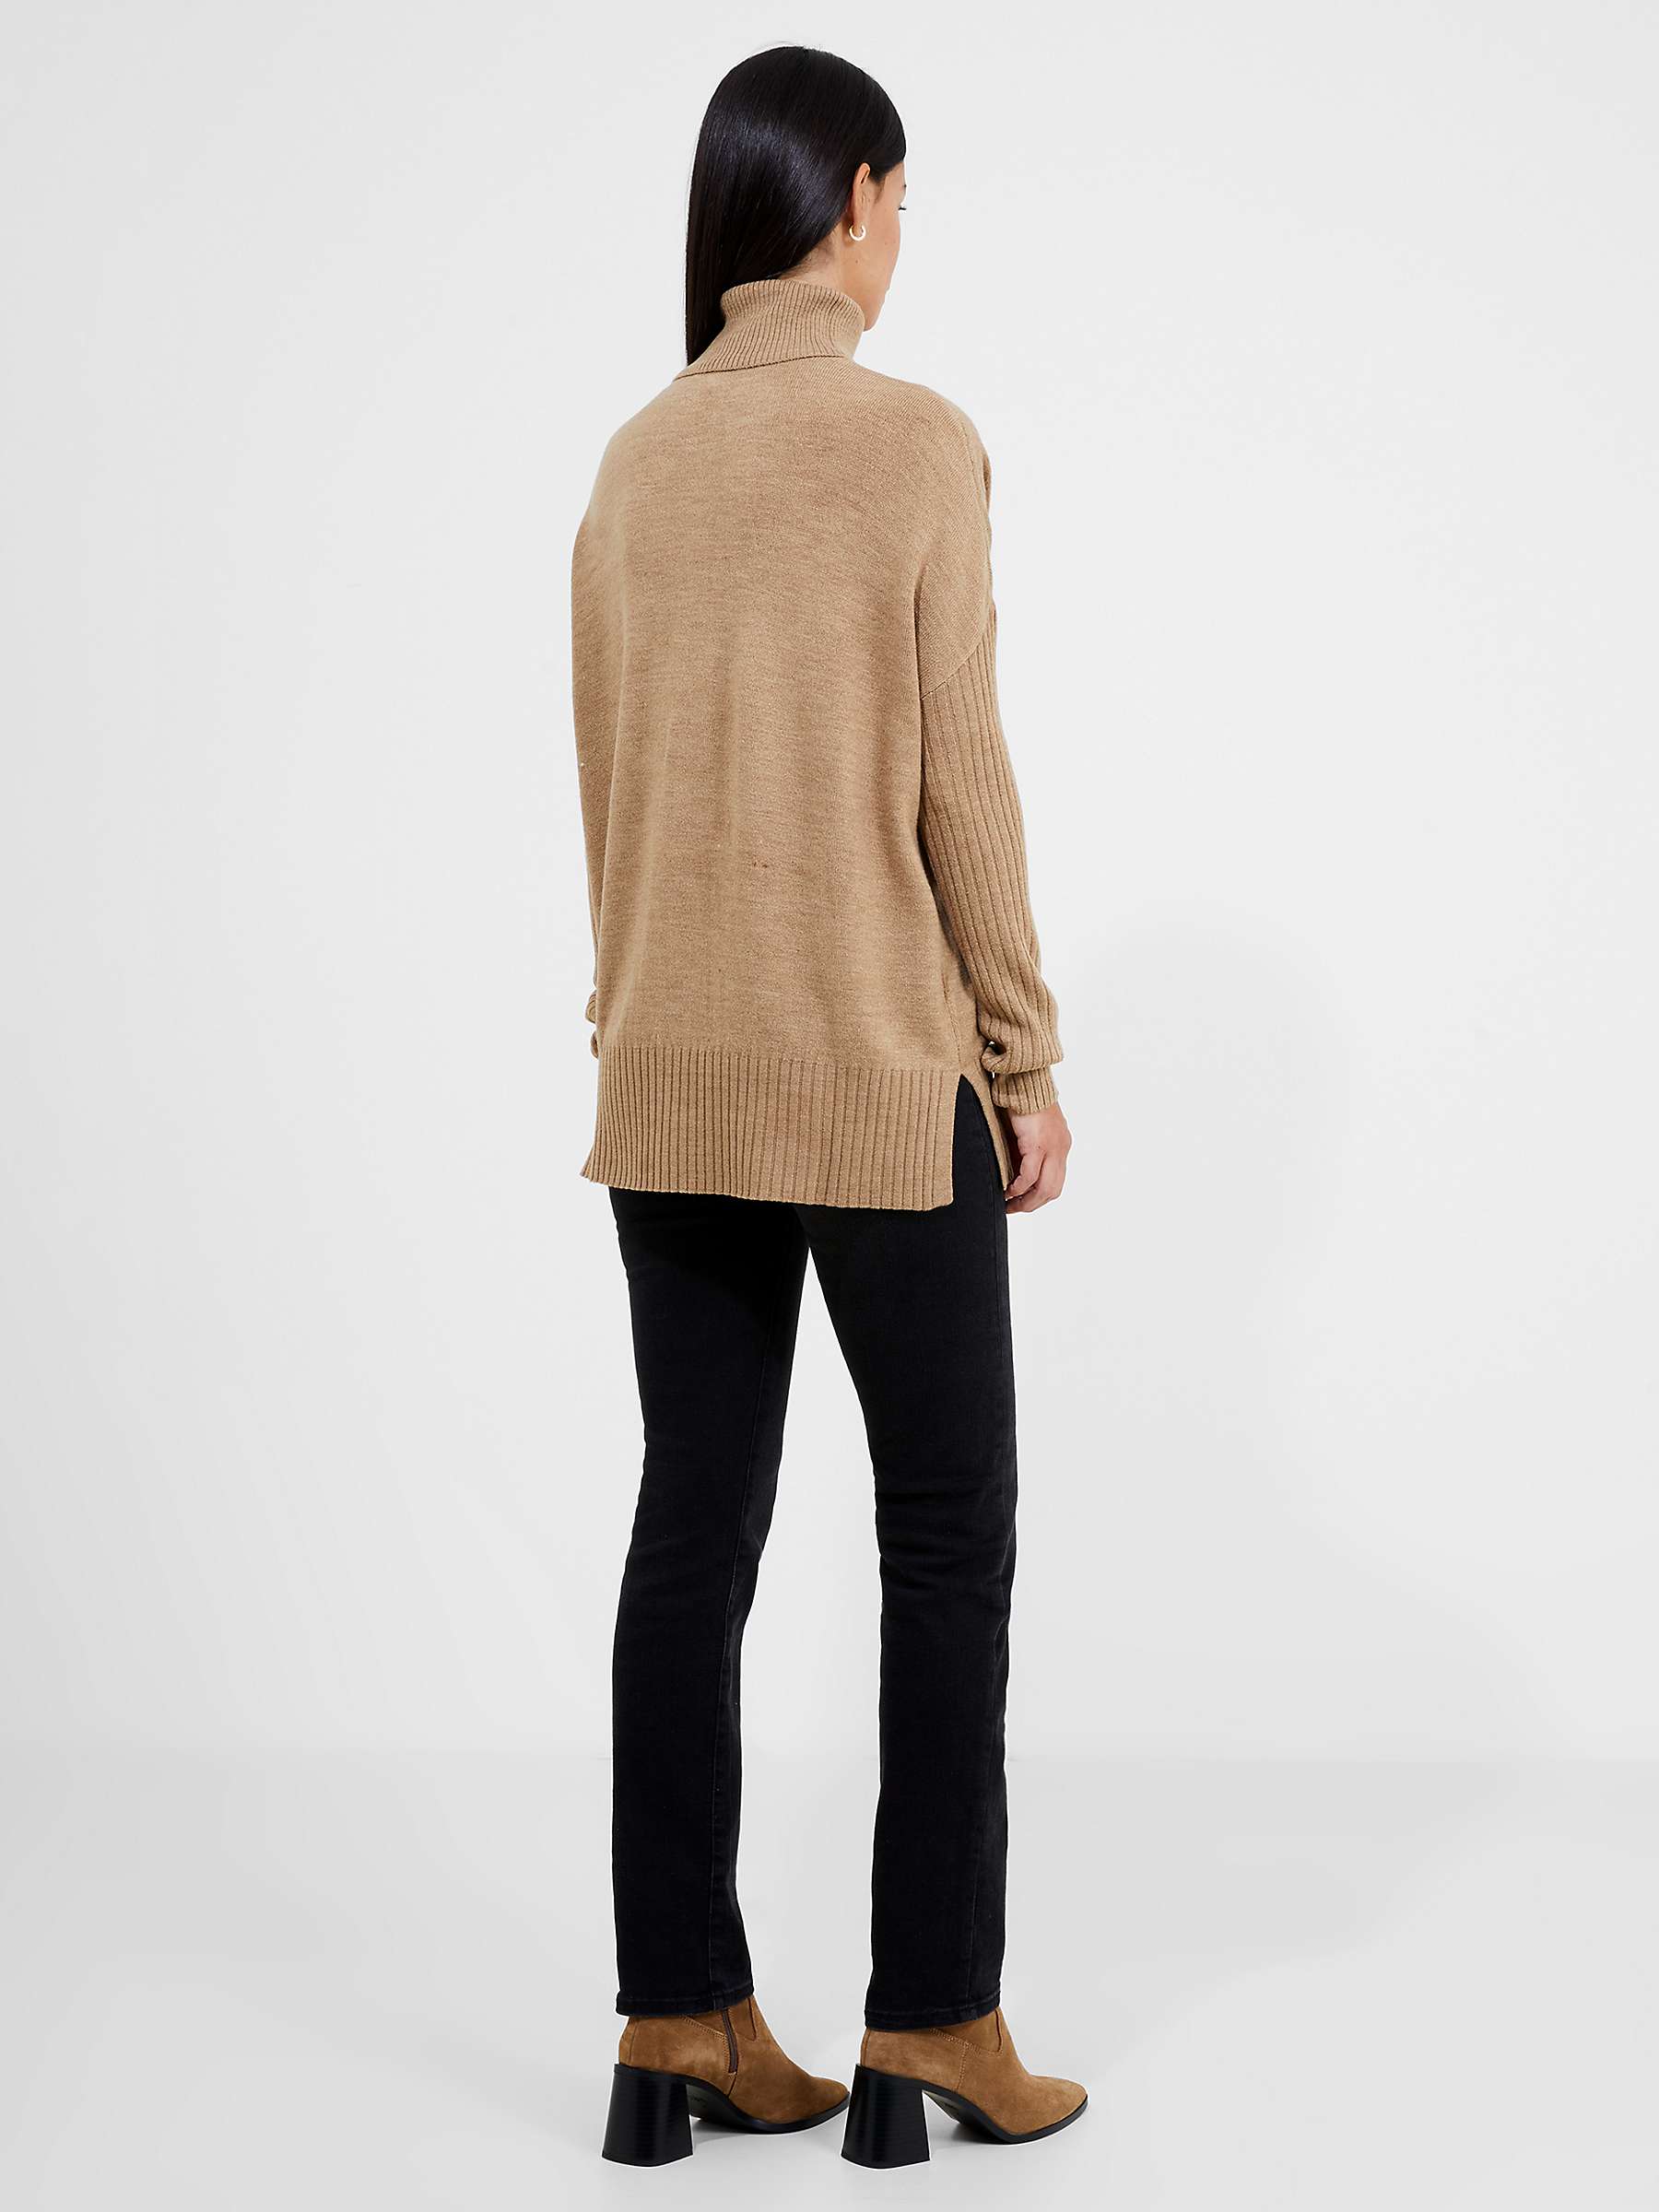 Buy French Connection Babysoft Ribbed Sleeve Jumper Online at johnlewis.com